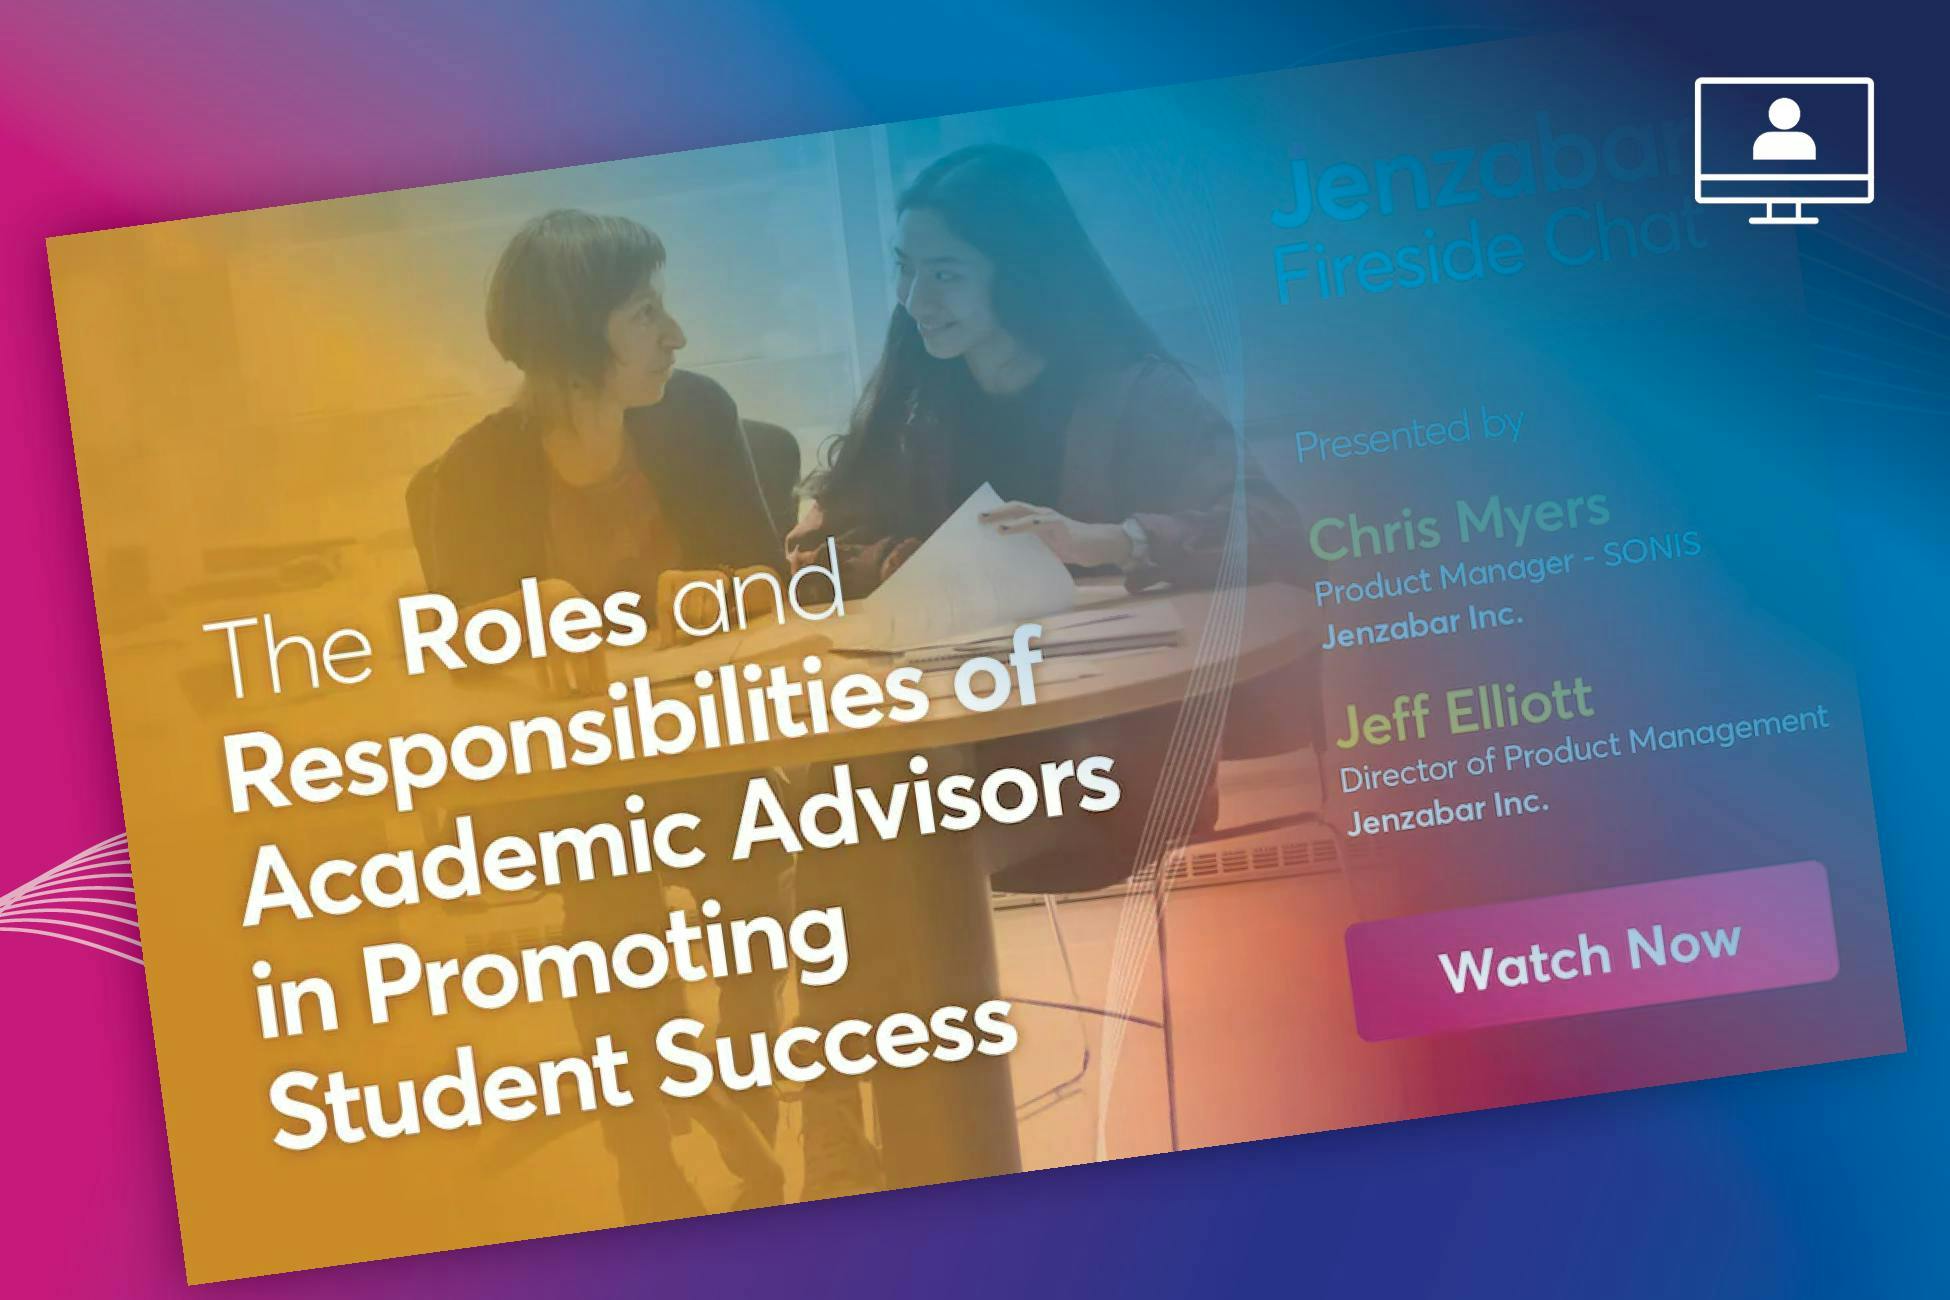 Fireside Chat: The Roles and Responsibilities of Academic Advisors in Promoting Student Success